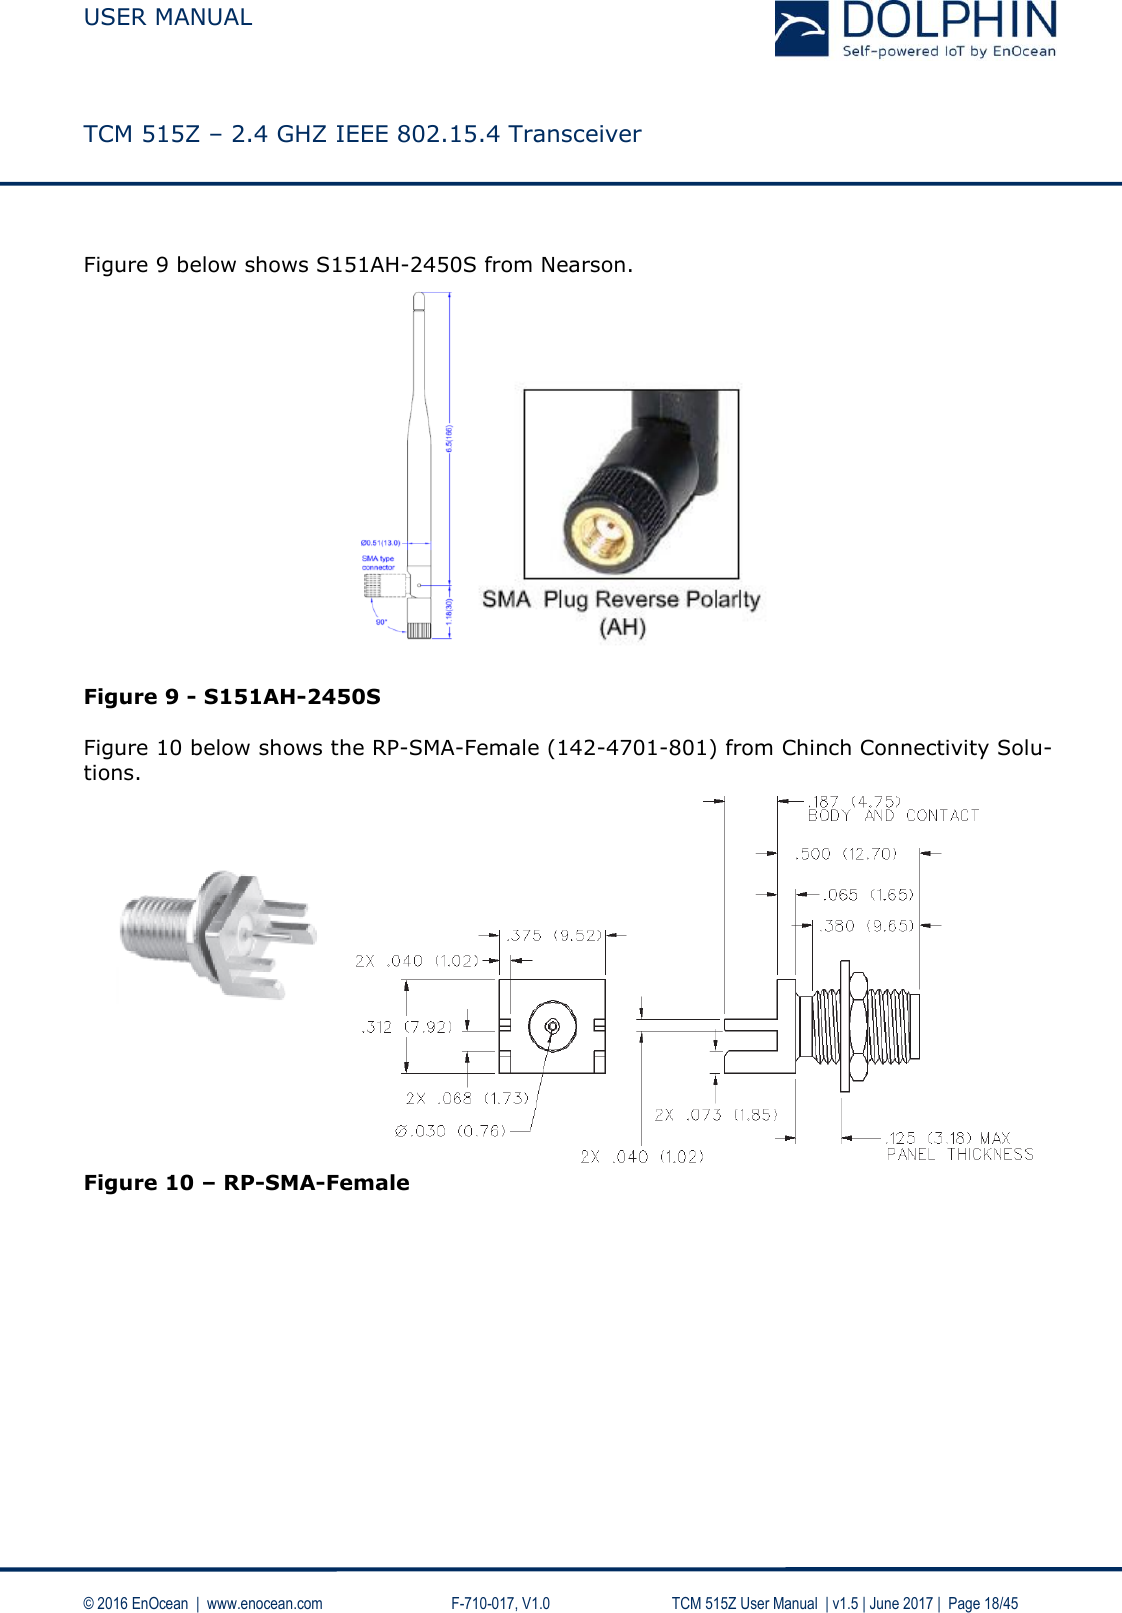  USER MANUAL    TCM 515Z – 2.4 GHZ IEEE 802.15.4 Transceiver   © 2016 EnOcean  |  www.enocean.com     F-710-017, V1.0        TCM 515Z User Manual  | v1.5 | June 2017 |  Page 18/45  Figure 9 below shows S151AH-2450S from Nearson.     Figure 9 - S151AH-2450S  Figure 10 below shows the RP-SMA-Female (142-4701-801) from Chinch Connectivity Solu-tions.  Figure 10 – RP-SMA-Female    